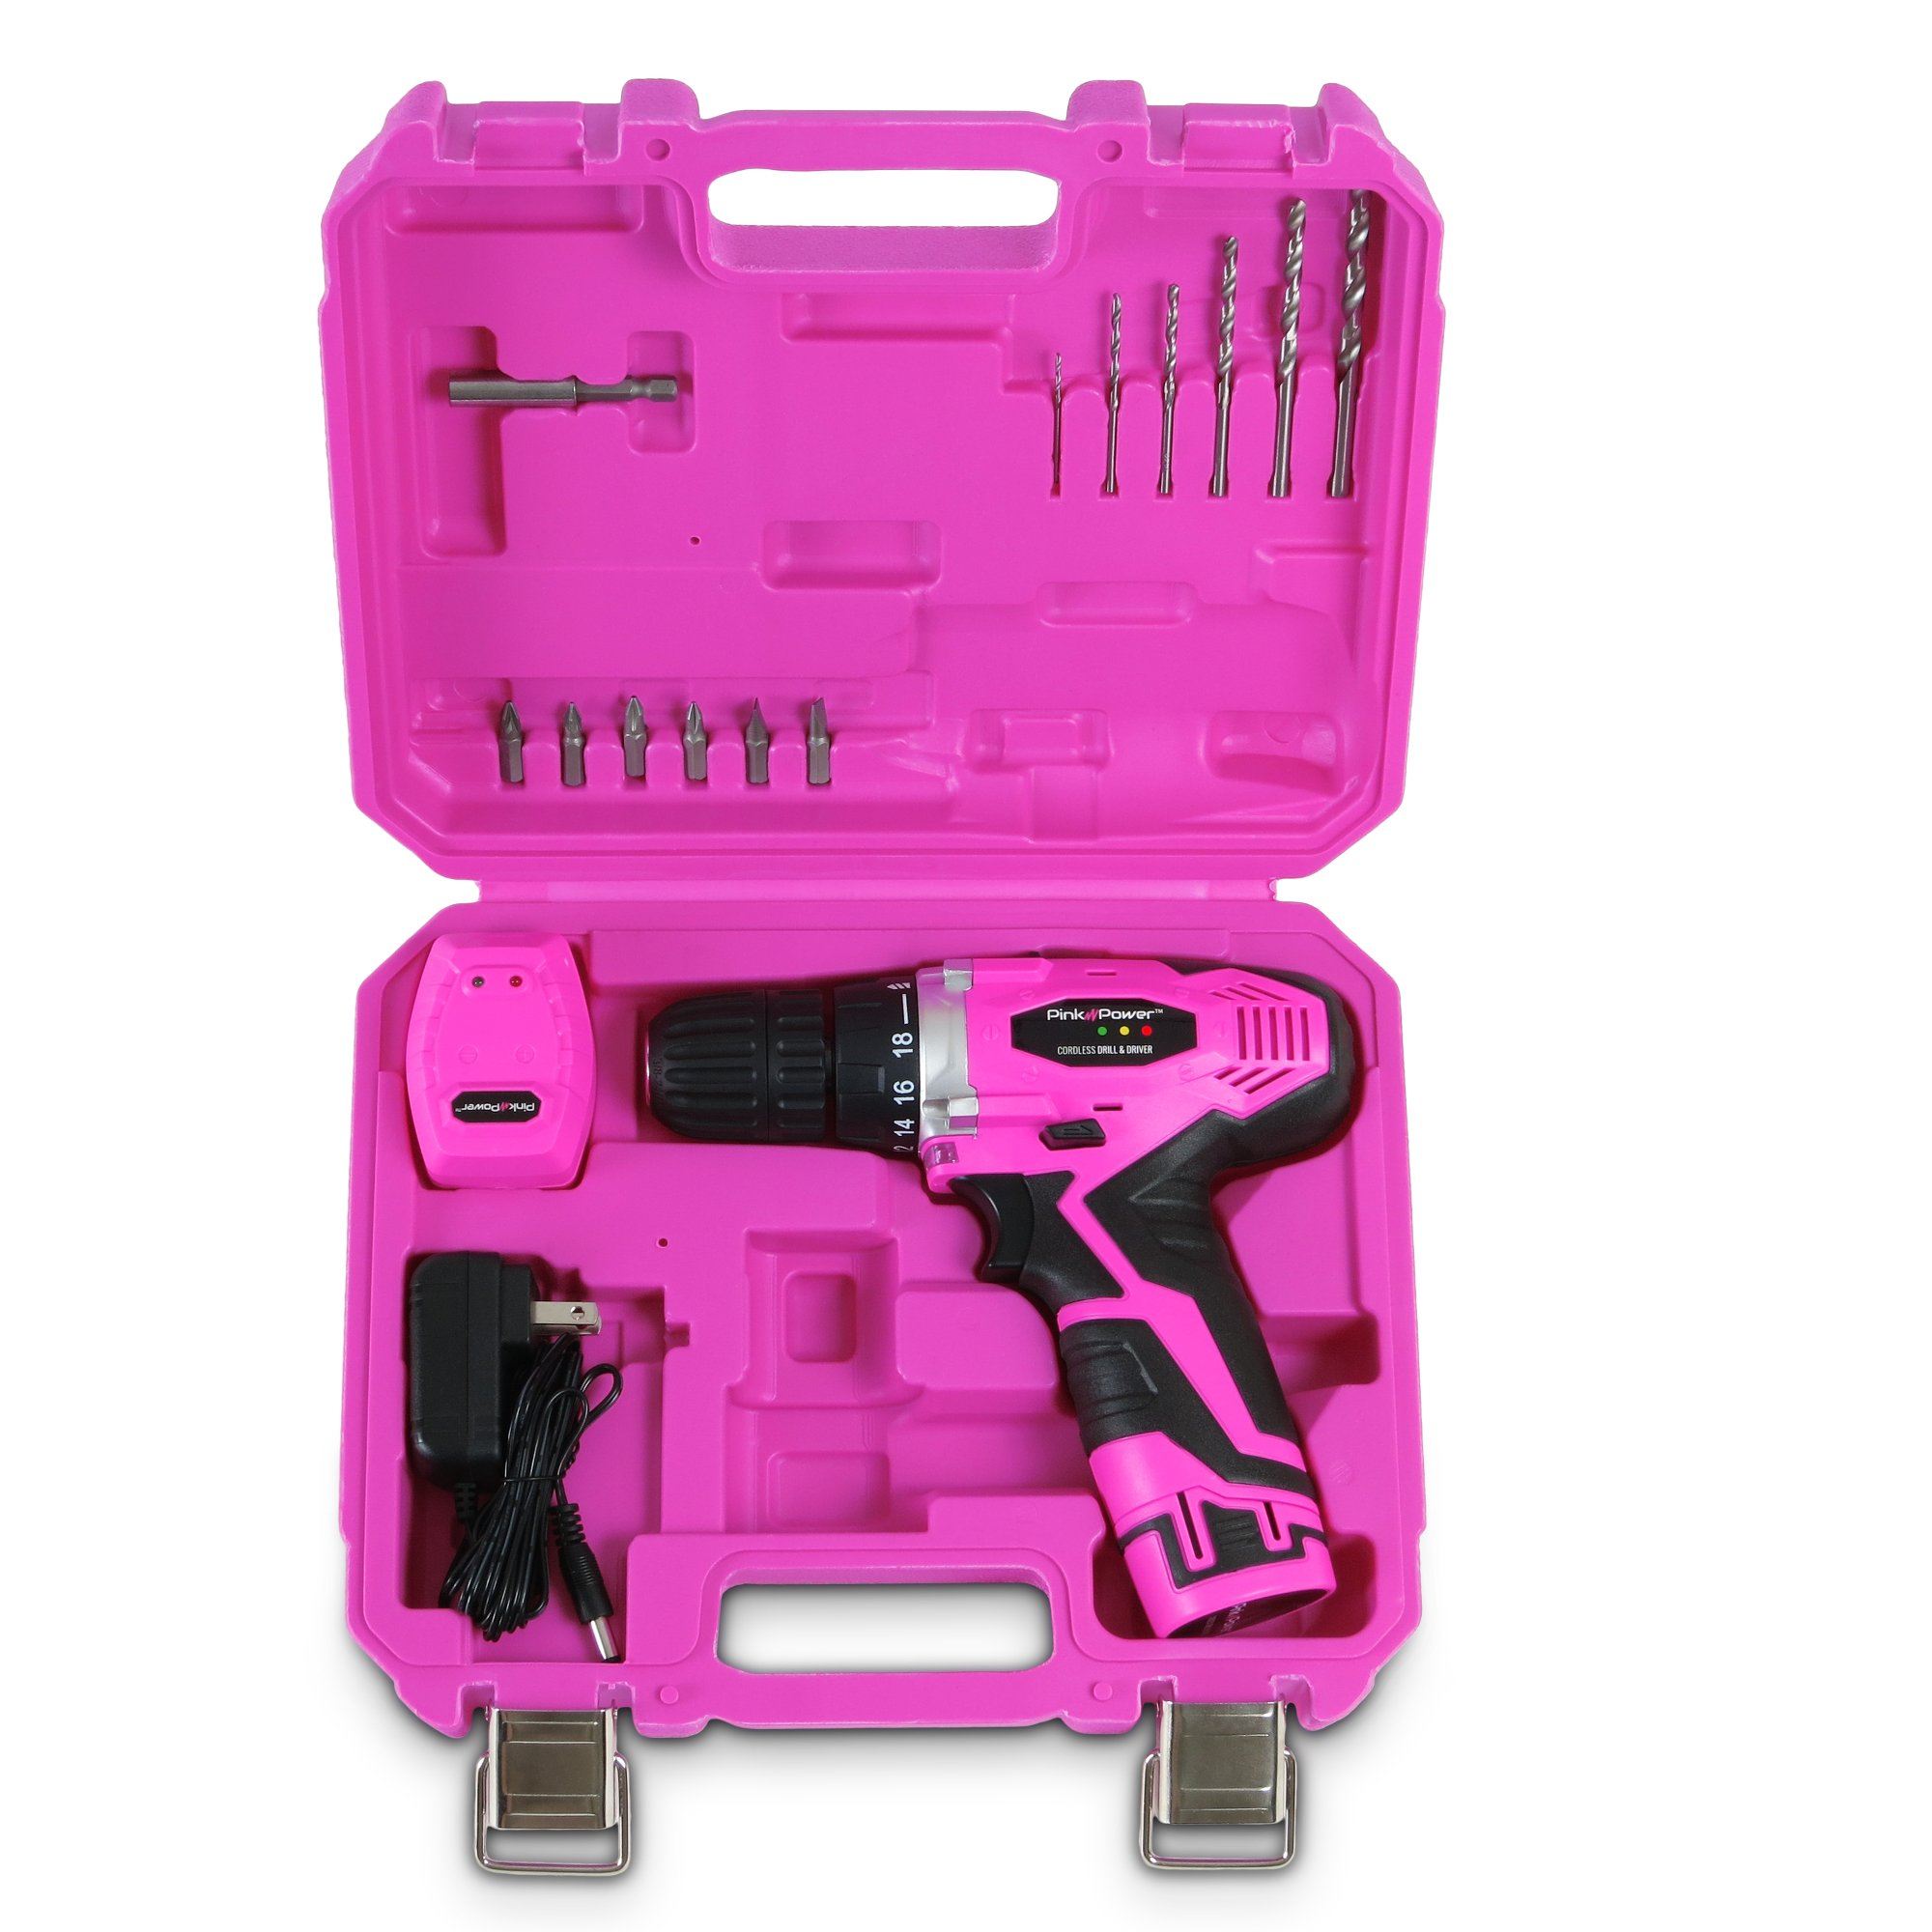 12-VOLT LITHIUM ION CORDLESS DRILL KIT AND EXTRA BATTERY BUNDLE Pink Power